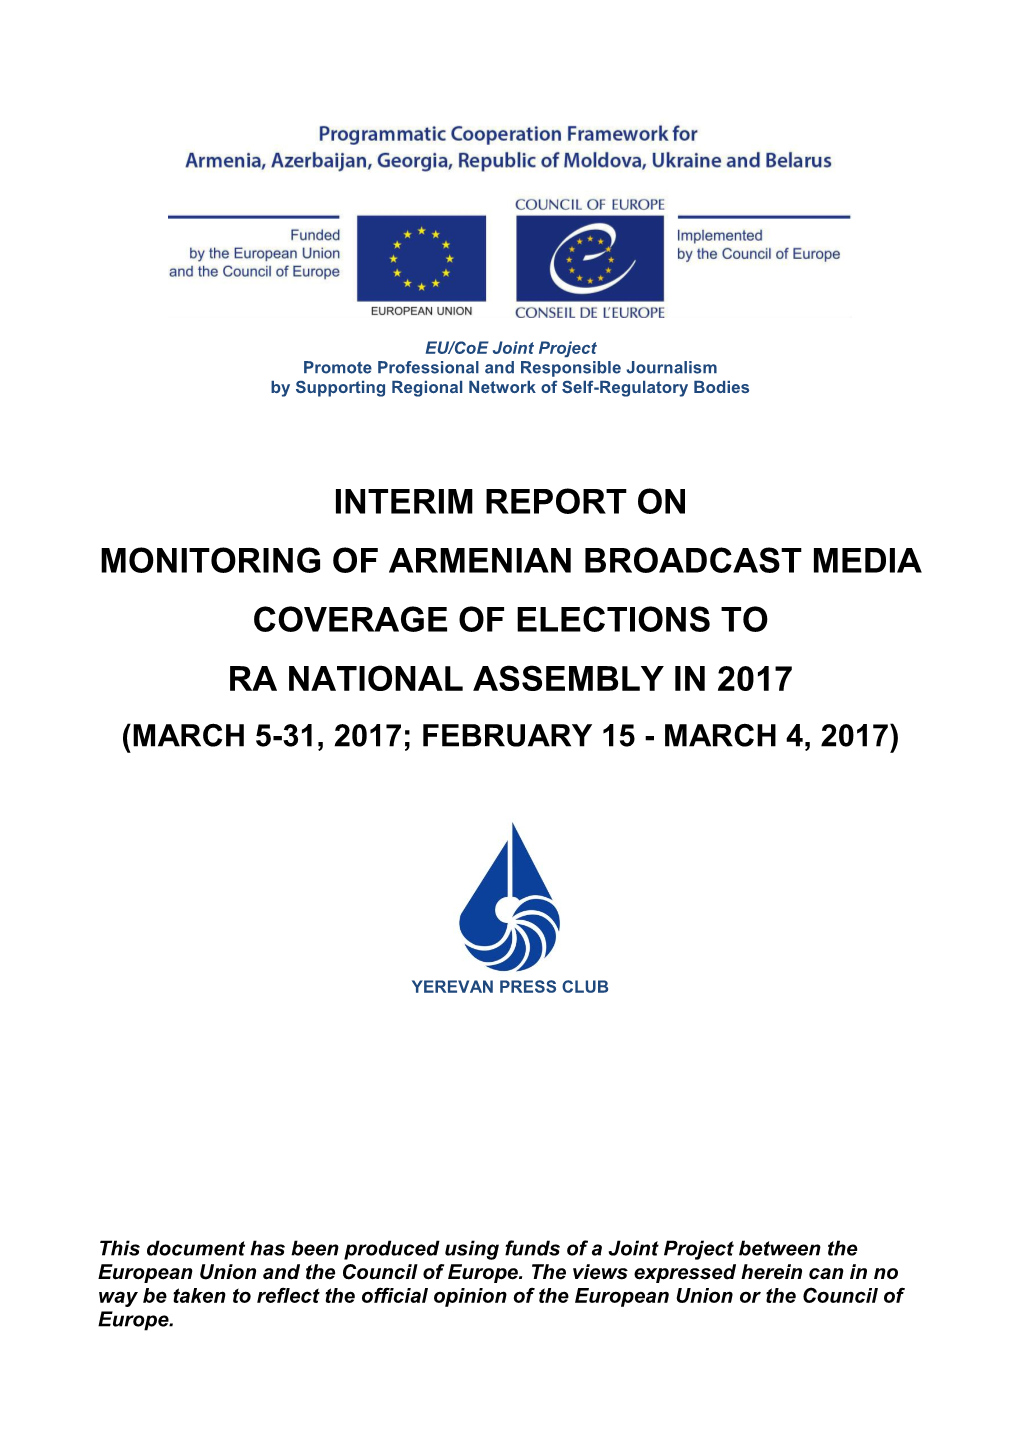 Interim Report on Monitoring of Armenian Broadcast Media Coverage of Elections to Ra National Assembly in 2017 (March 5-31, 2017; February 15 - March 4, 2017)